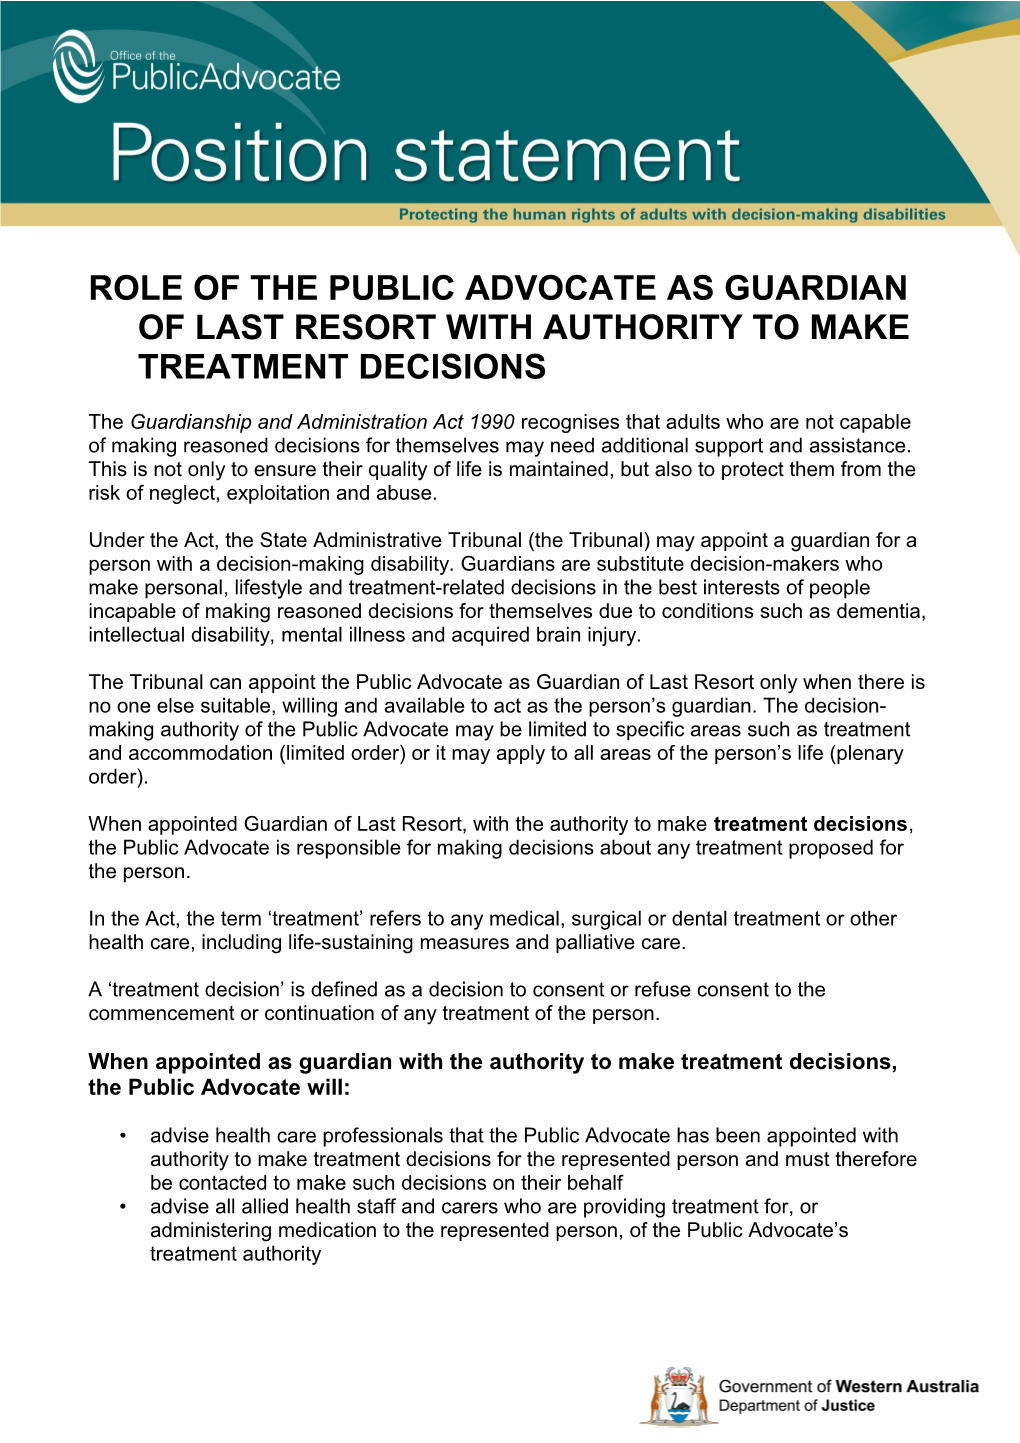 Role of the Public Advocate As Guardian of Last Resort with Authority to Make Treatment